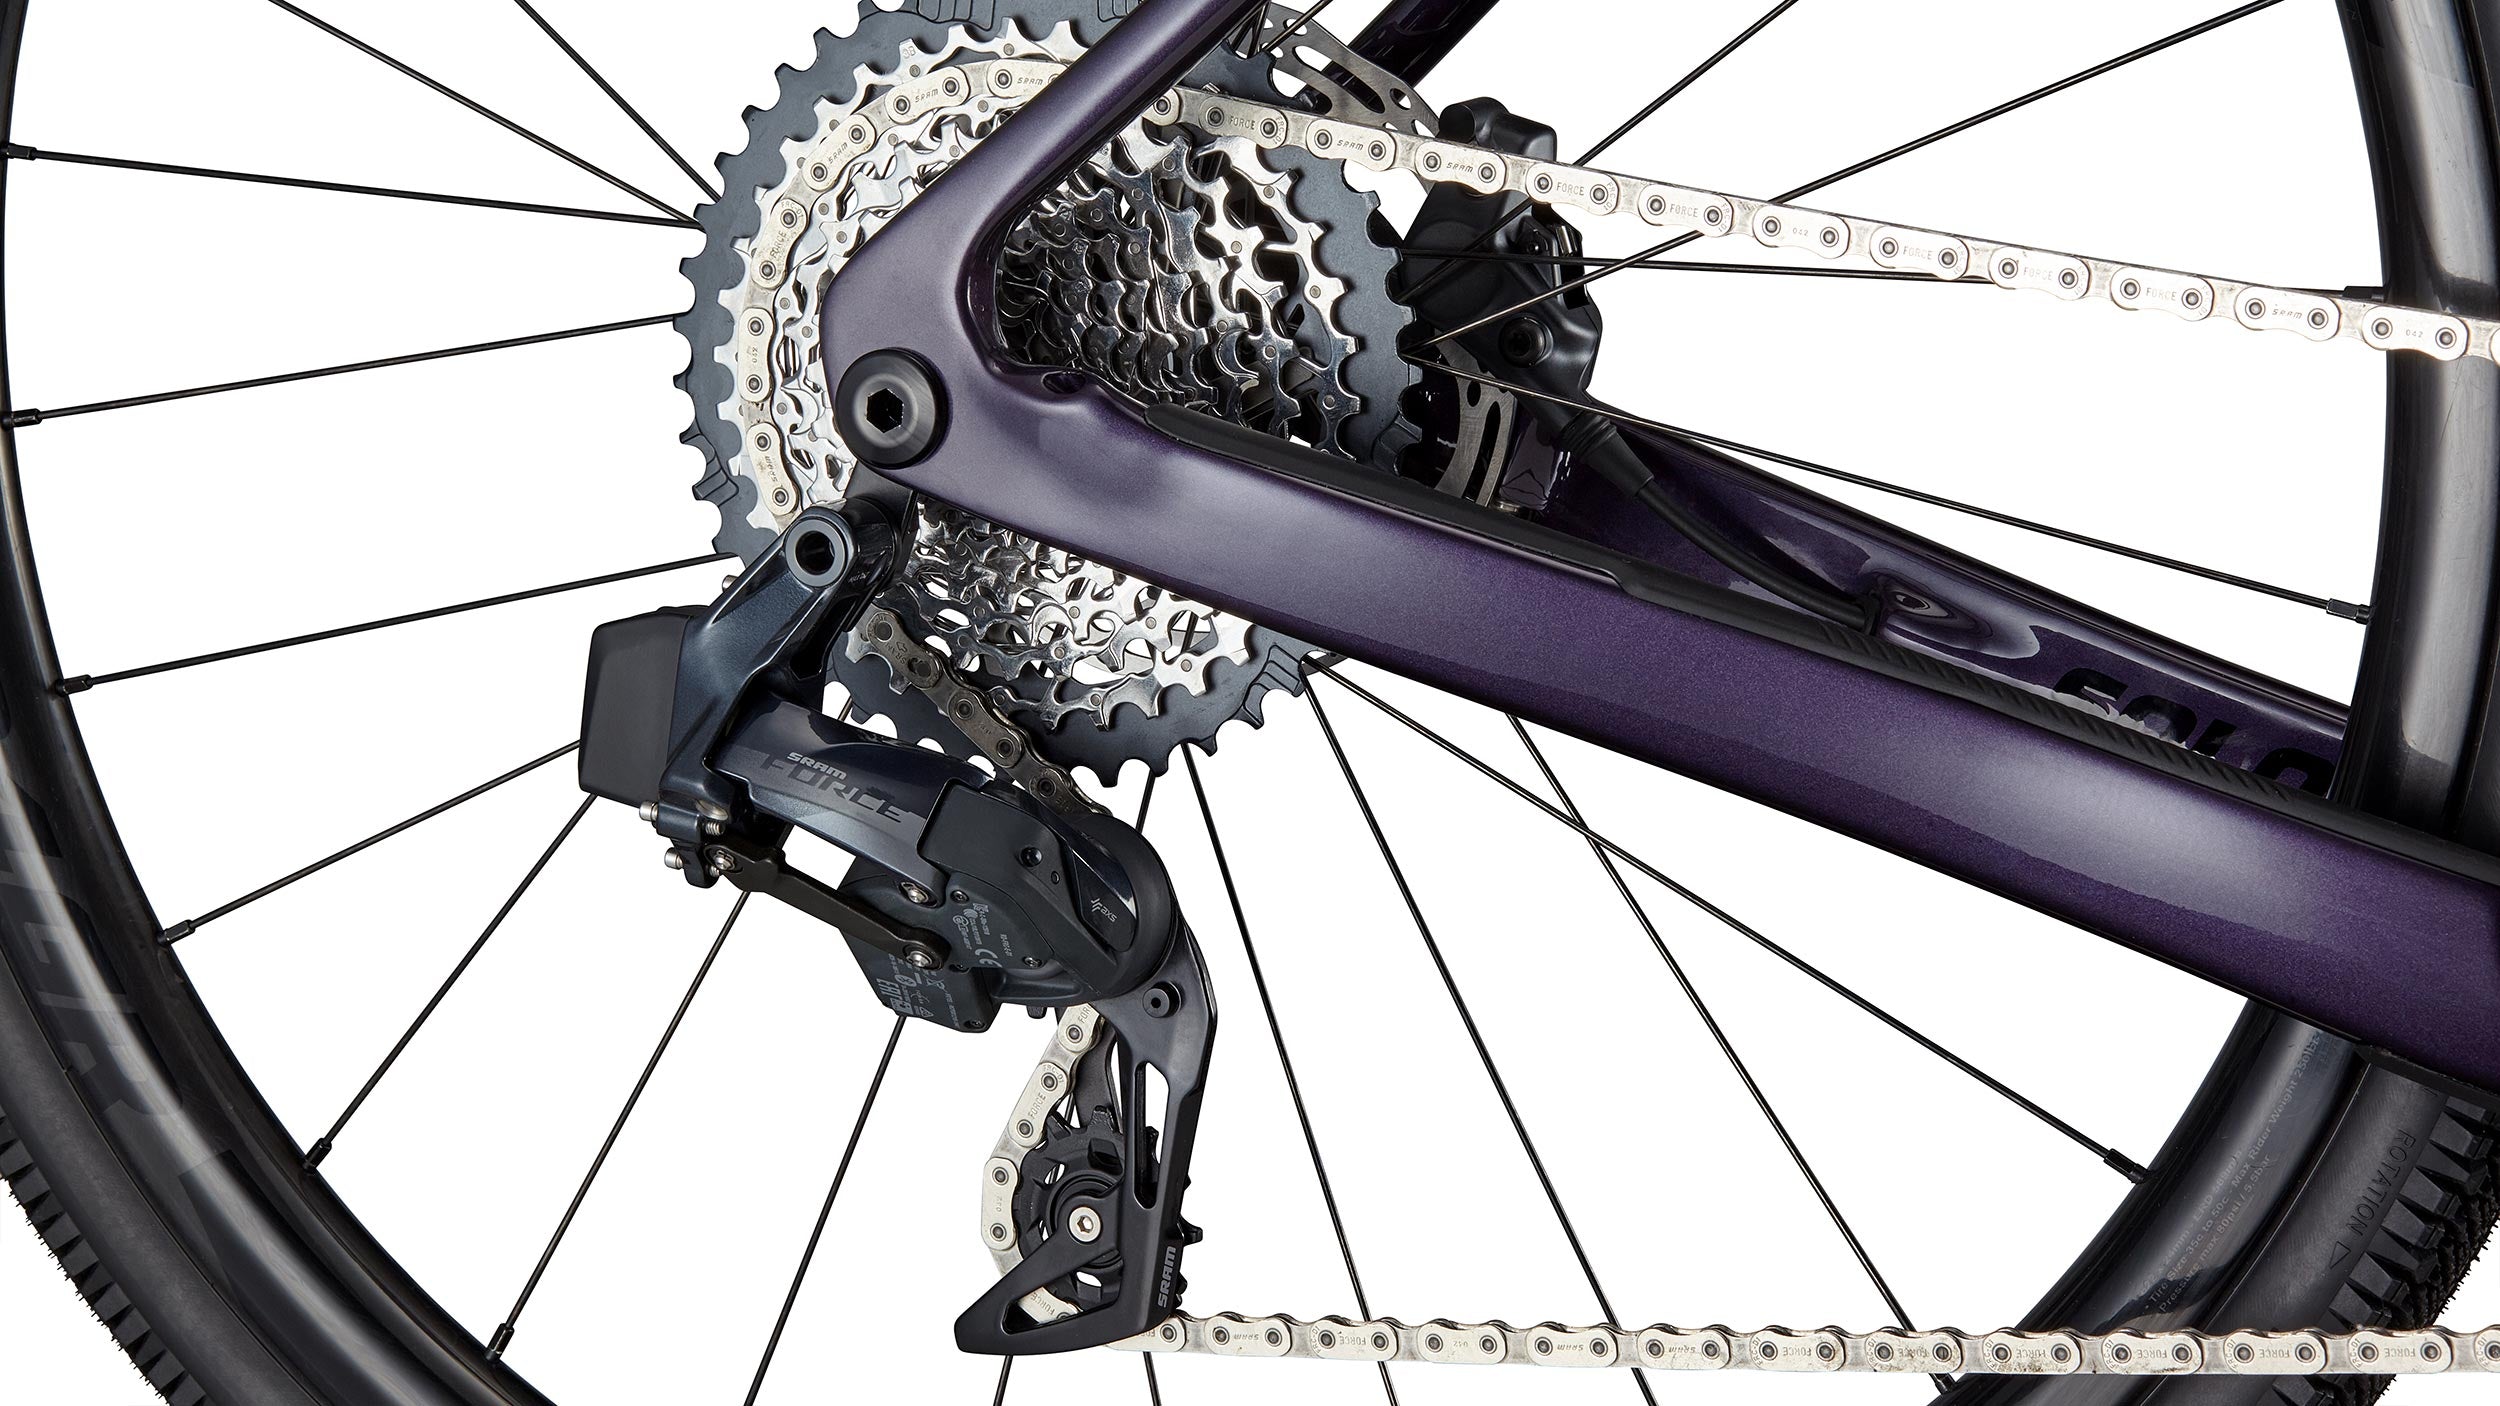 _caption_The SRAM Force XPLR AXS drivetrain provides a wide gear ratio and wireless shifting, making it ideal for gravel riders who want to conquer any terrain with ease.